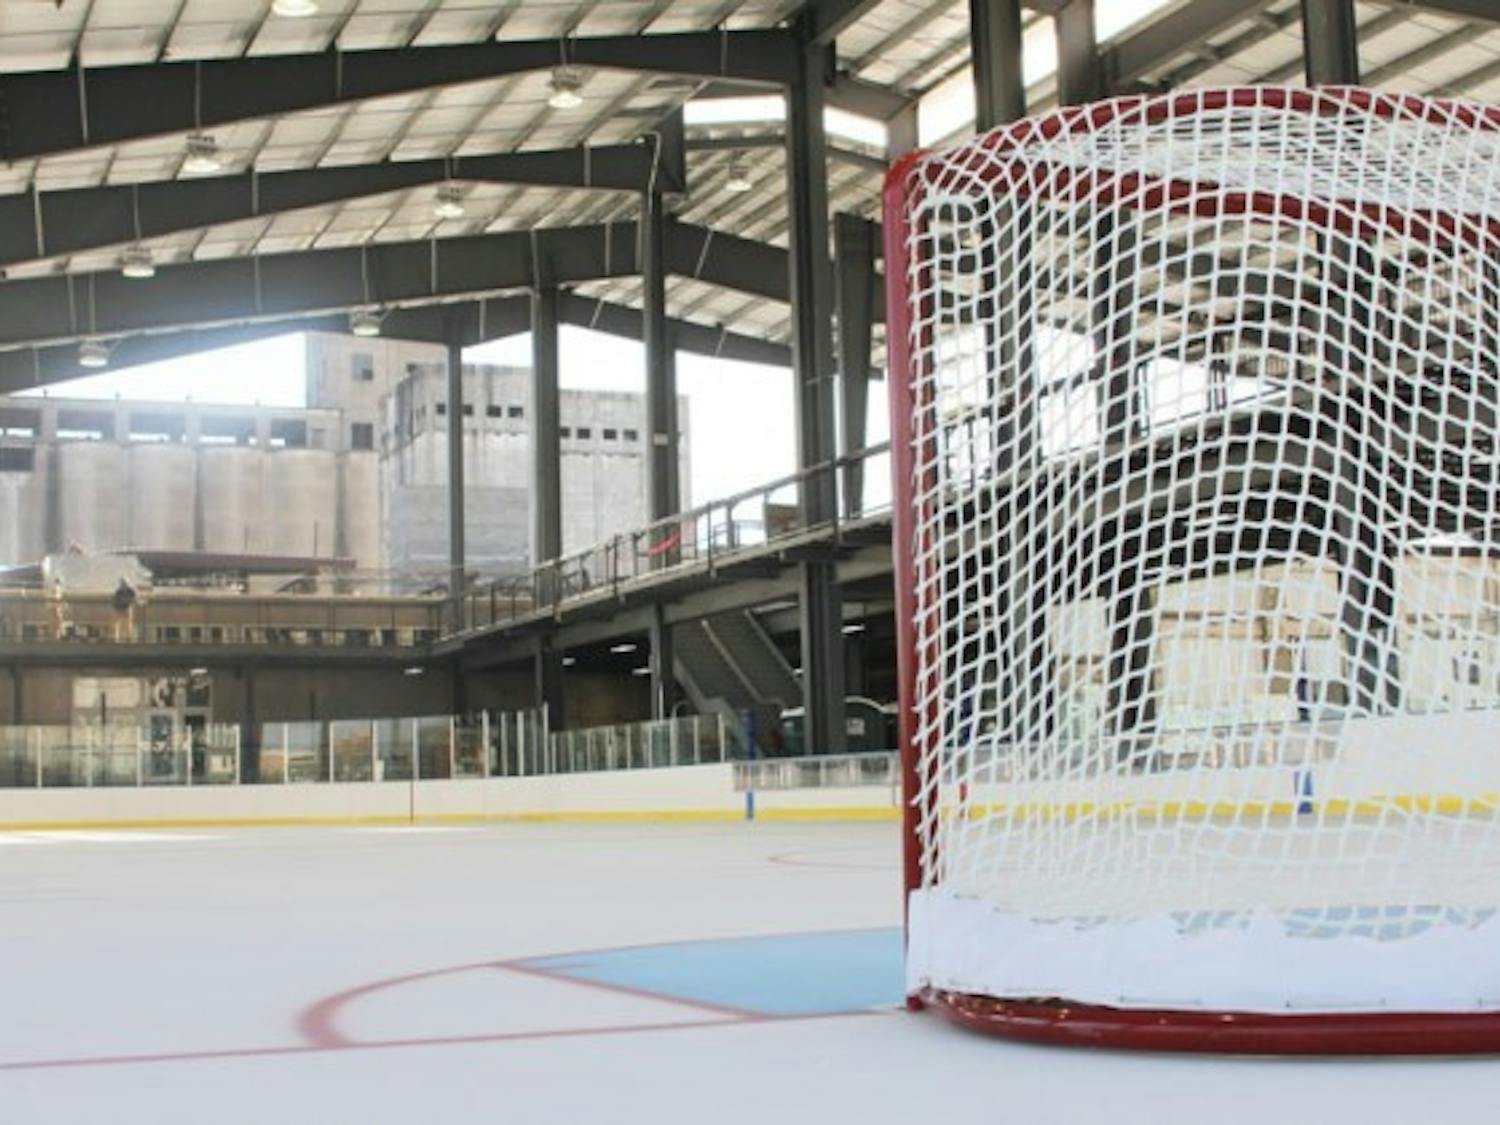 Buffalo RiverWorks, located at 359 Ganson Street, will offer people in Buffalo outdoor curling and ice hockey when it officially opens to the public February 2015.&nbsp;
Andy Koniuch, The Spectrum&nbsp;